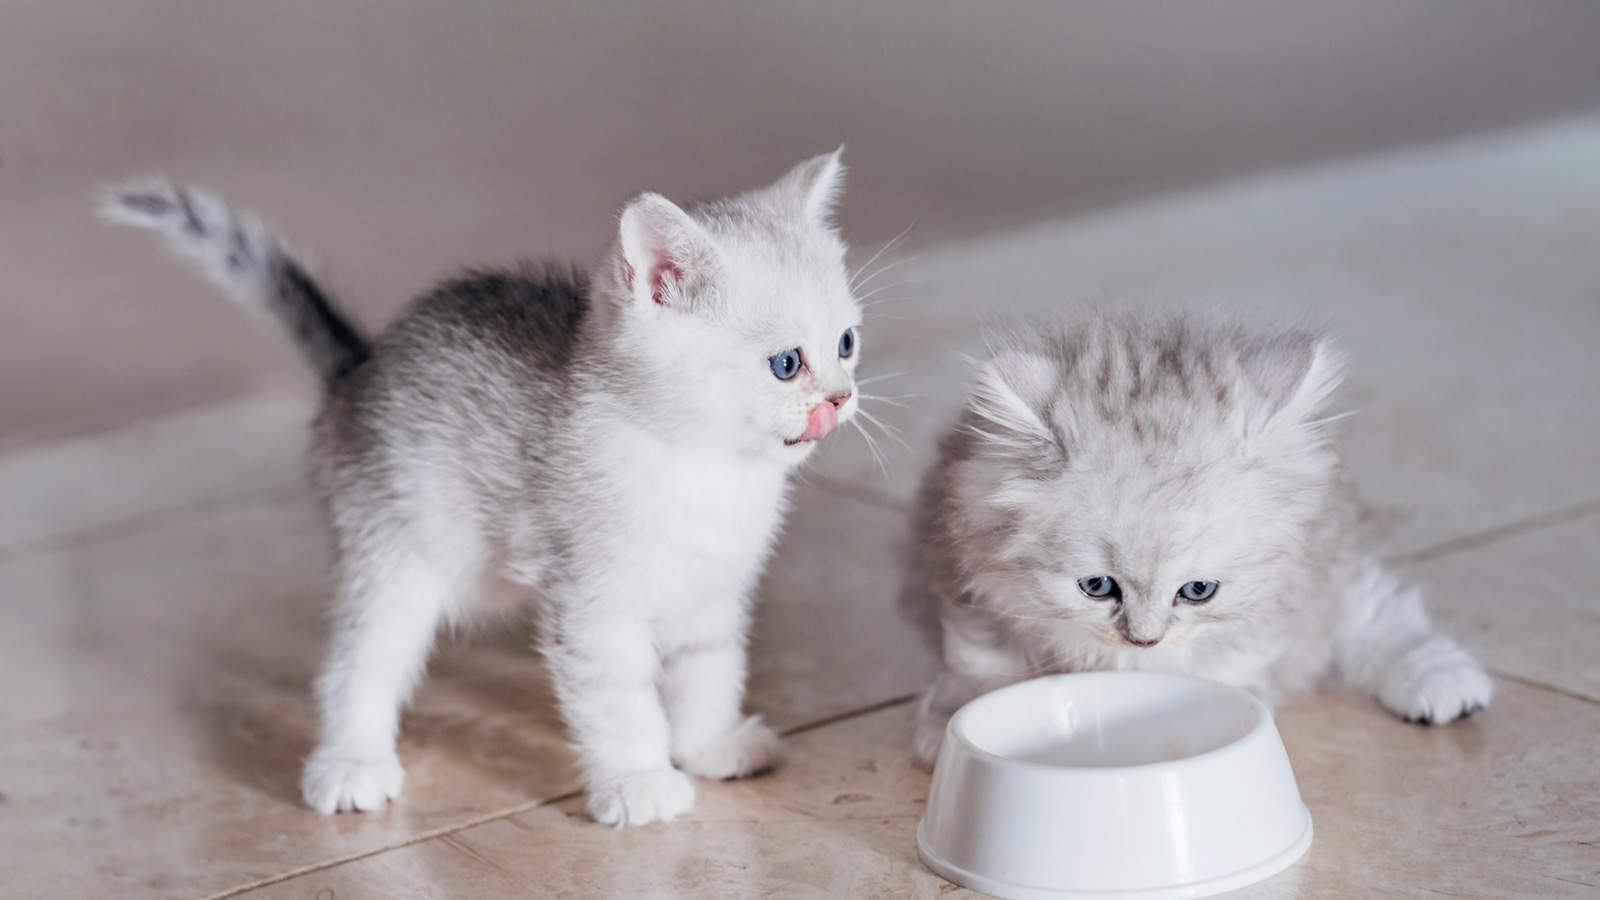 Two adorable kittens eating from same bowl